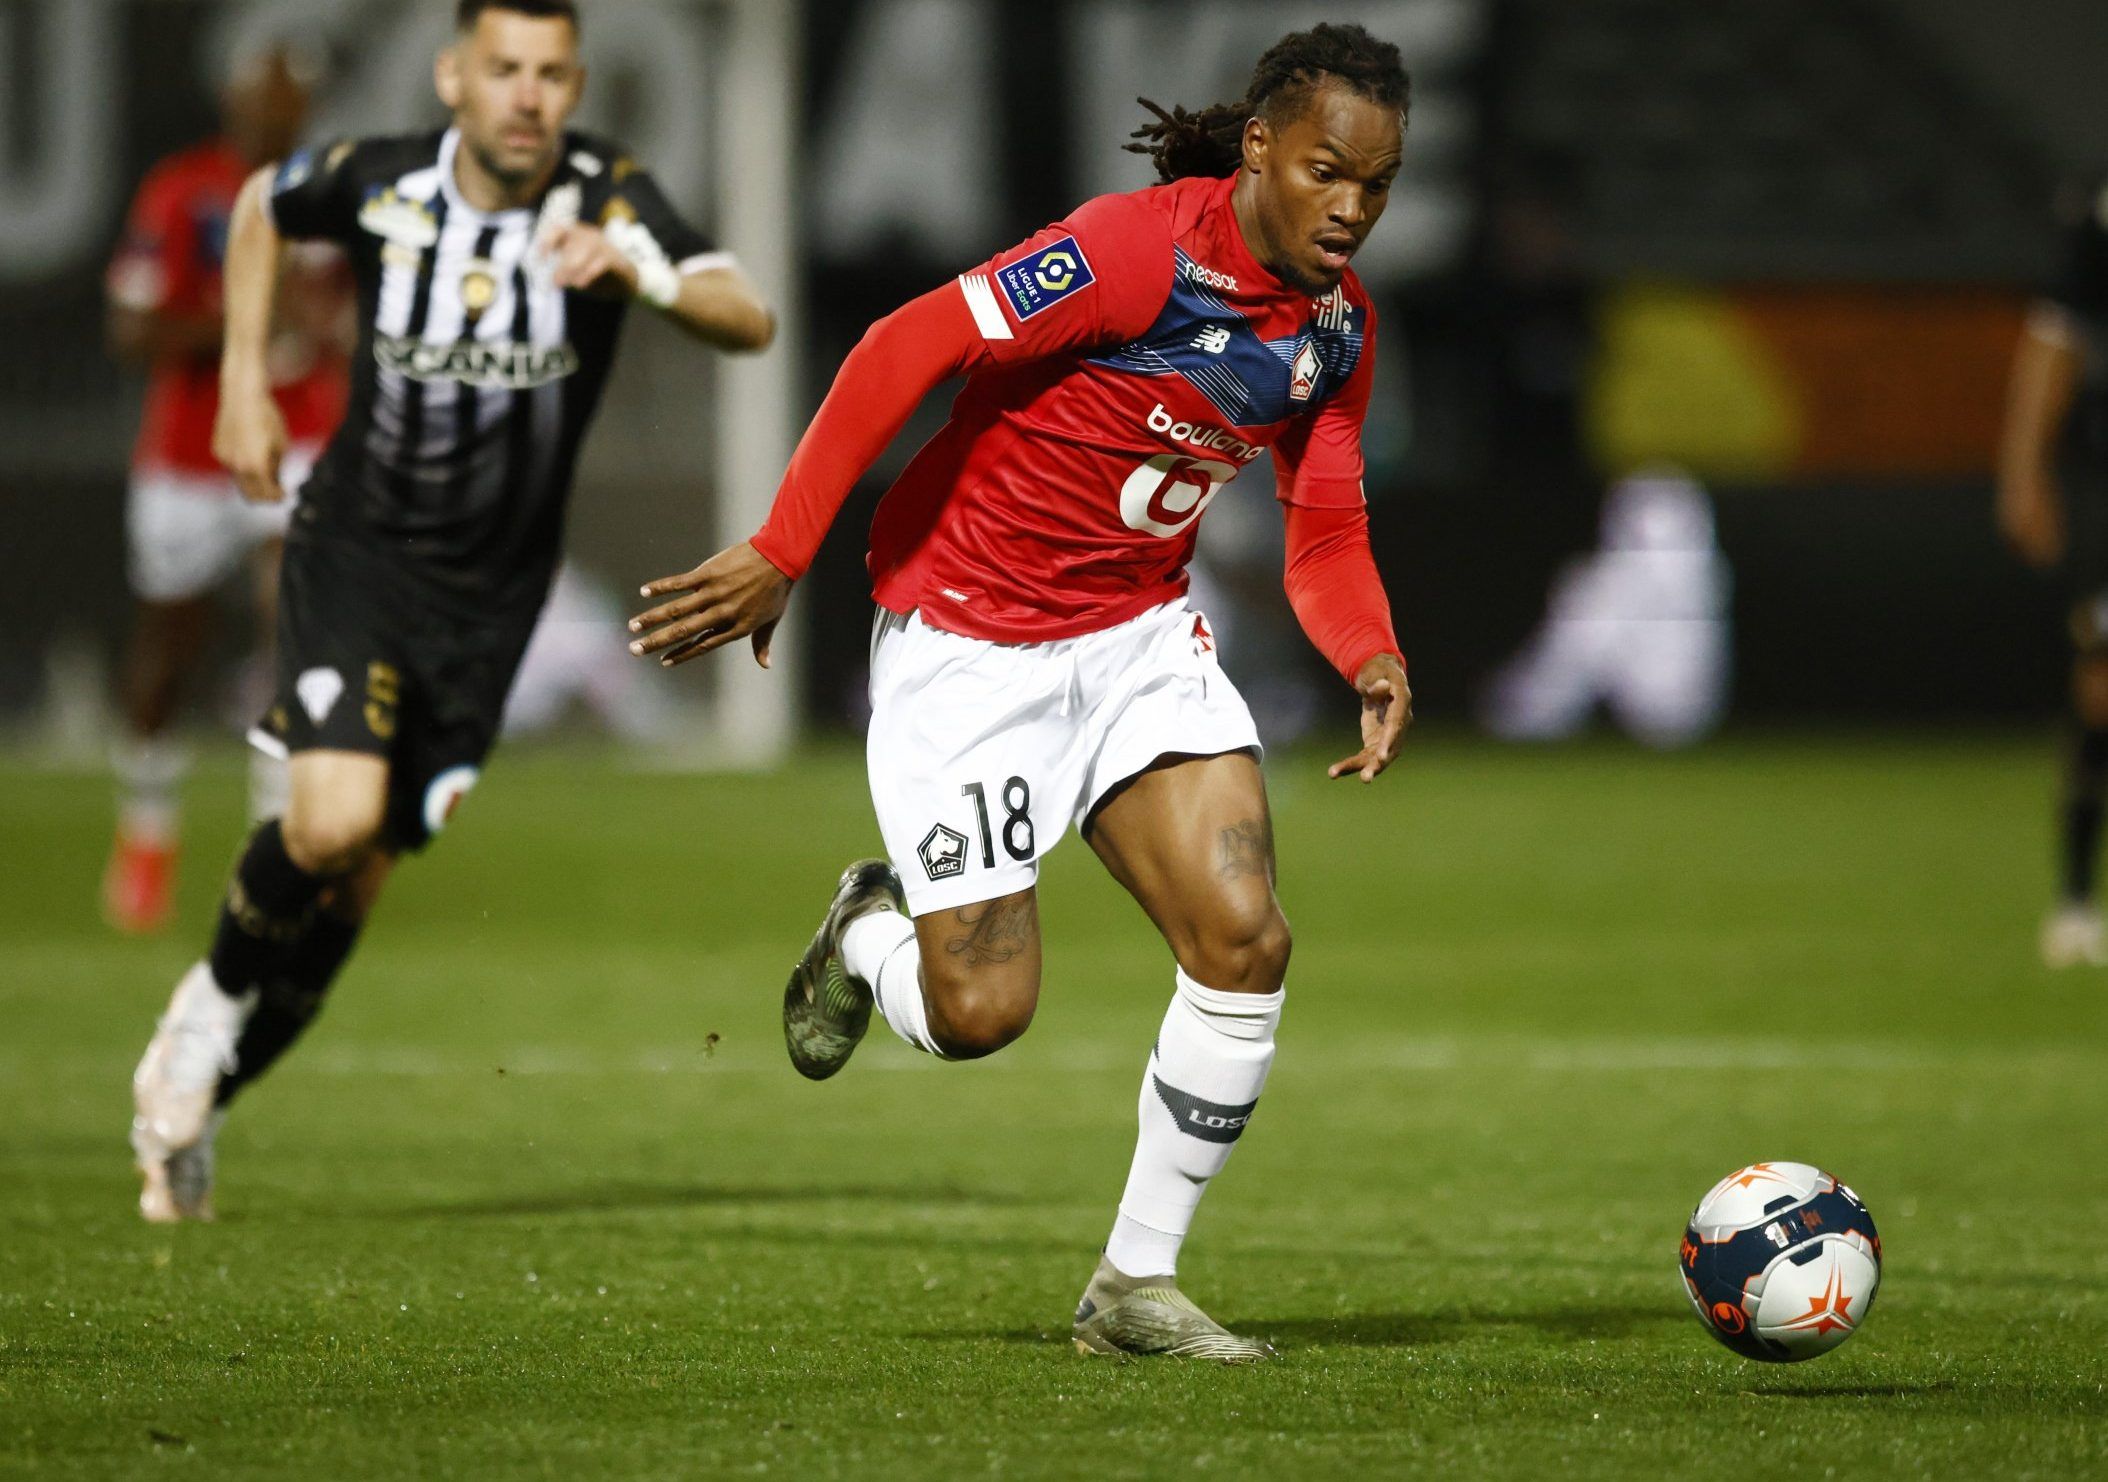 lille midfielder renato sanches on the ball against angers sco in ligue 1